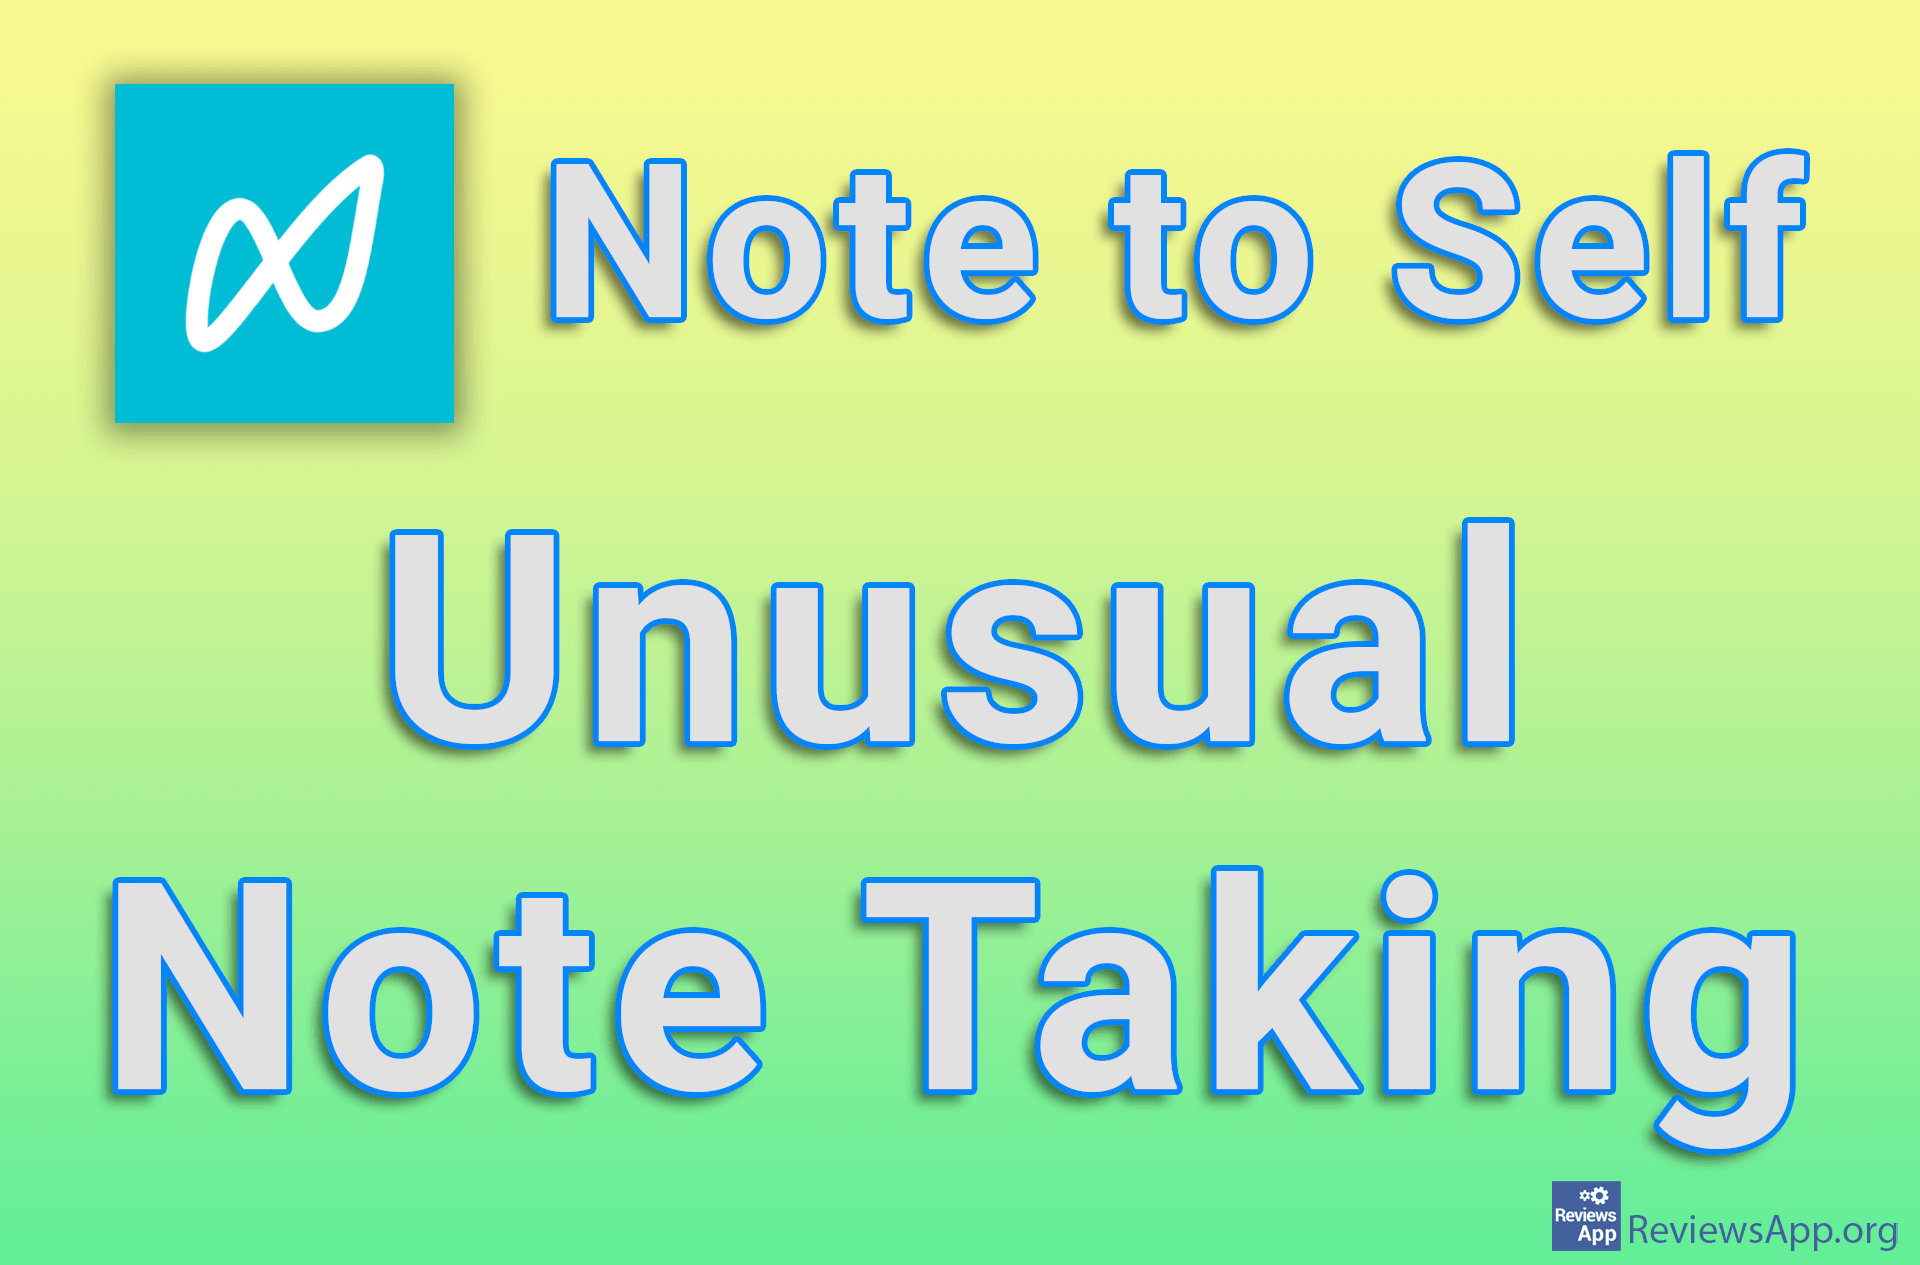 Note to Self – Unusual Note Taking